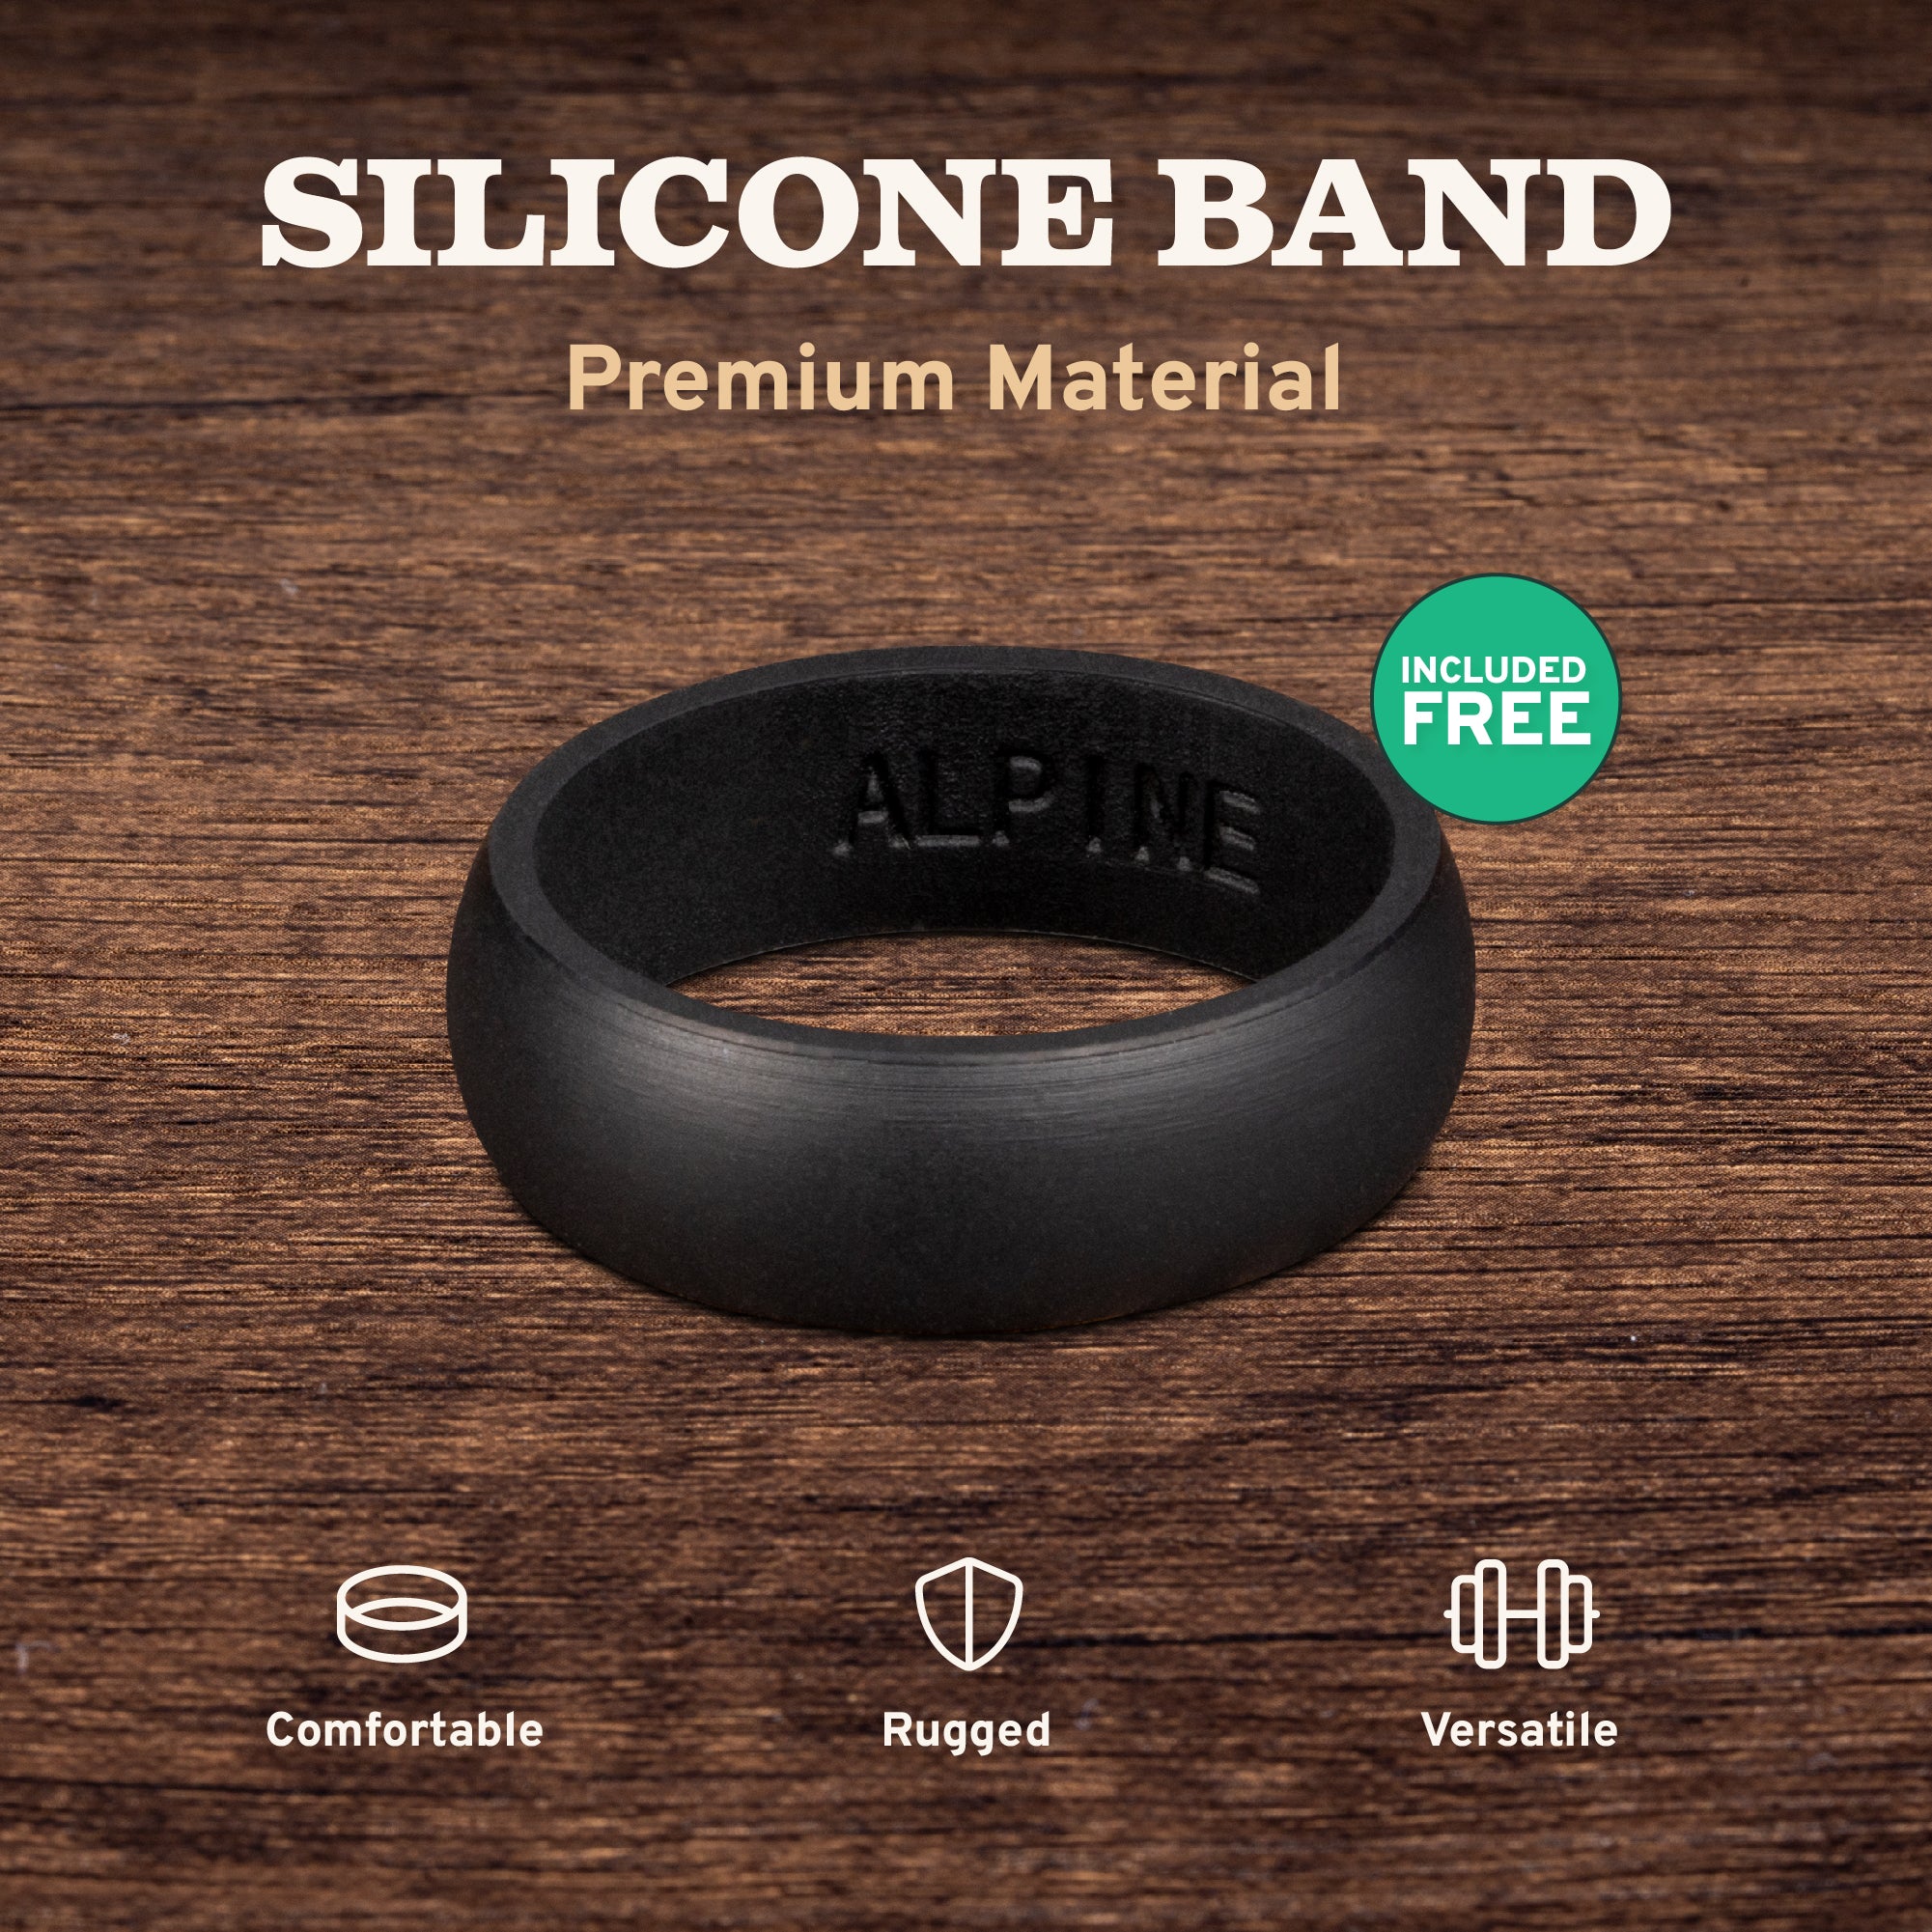 Black Tungsten Hammered Wedding Band With Black Apricot Wood 8MM